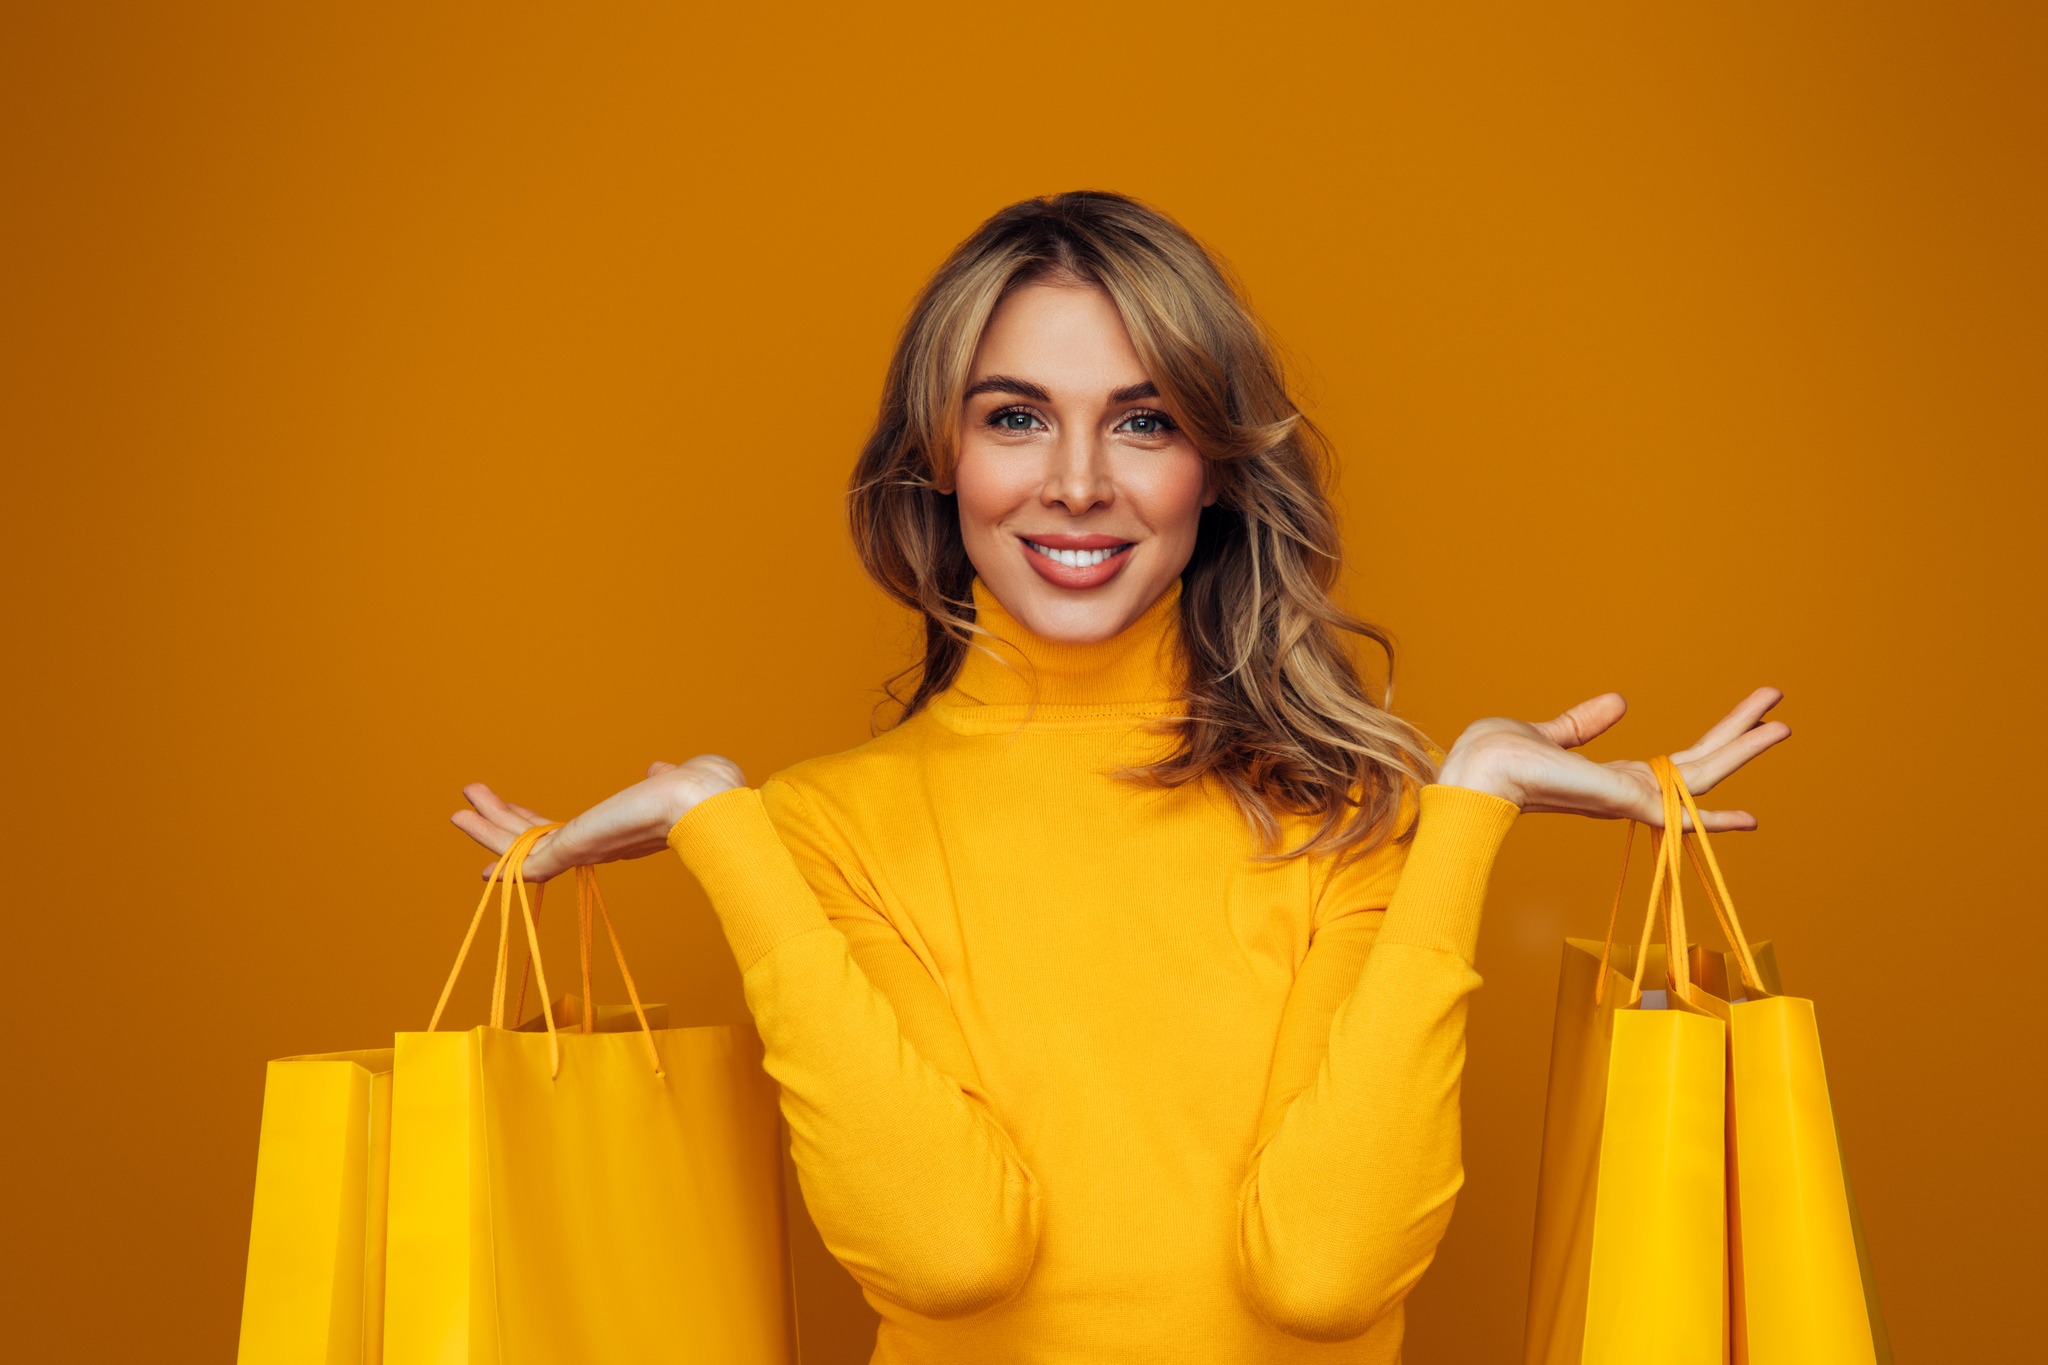 Fall Outdoor Shopping Sale - Blonde women in a yellow long sleeve turtle neck holding yellow shopping bags